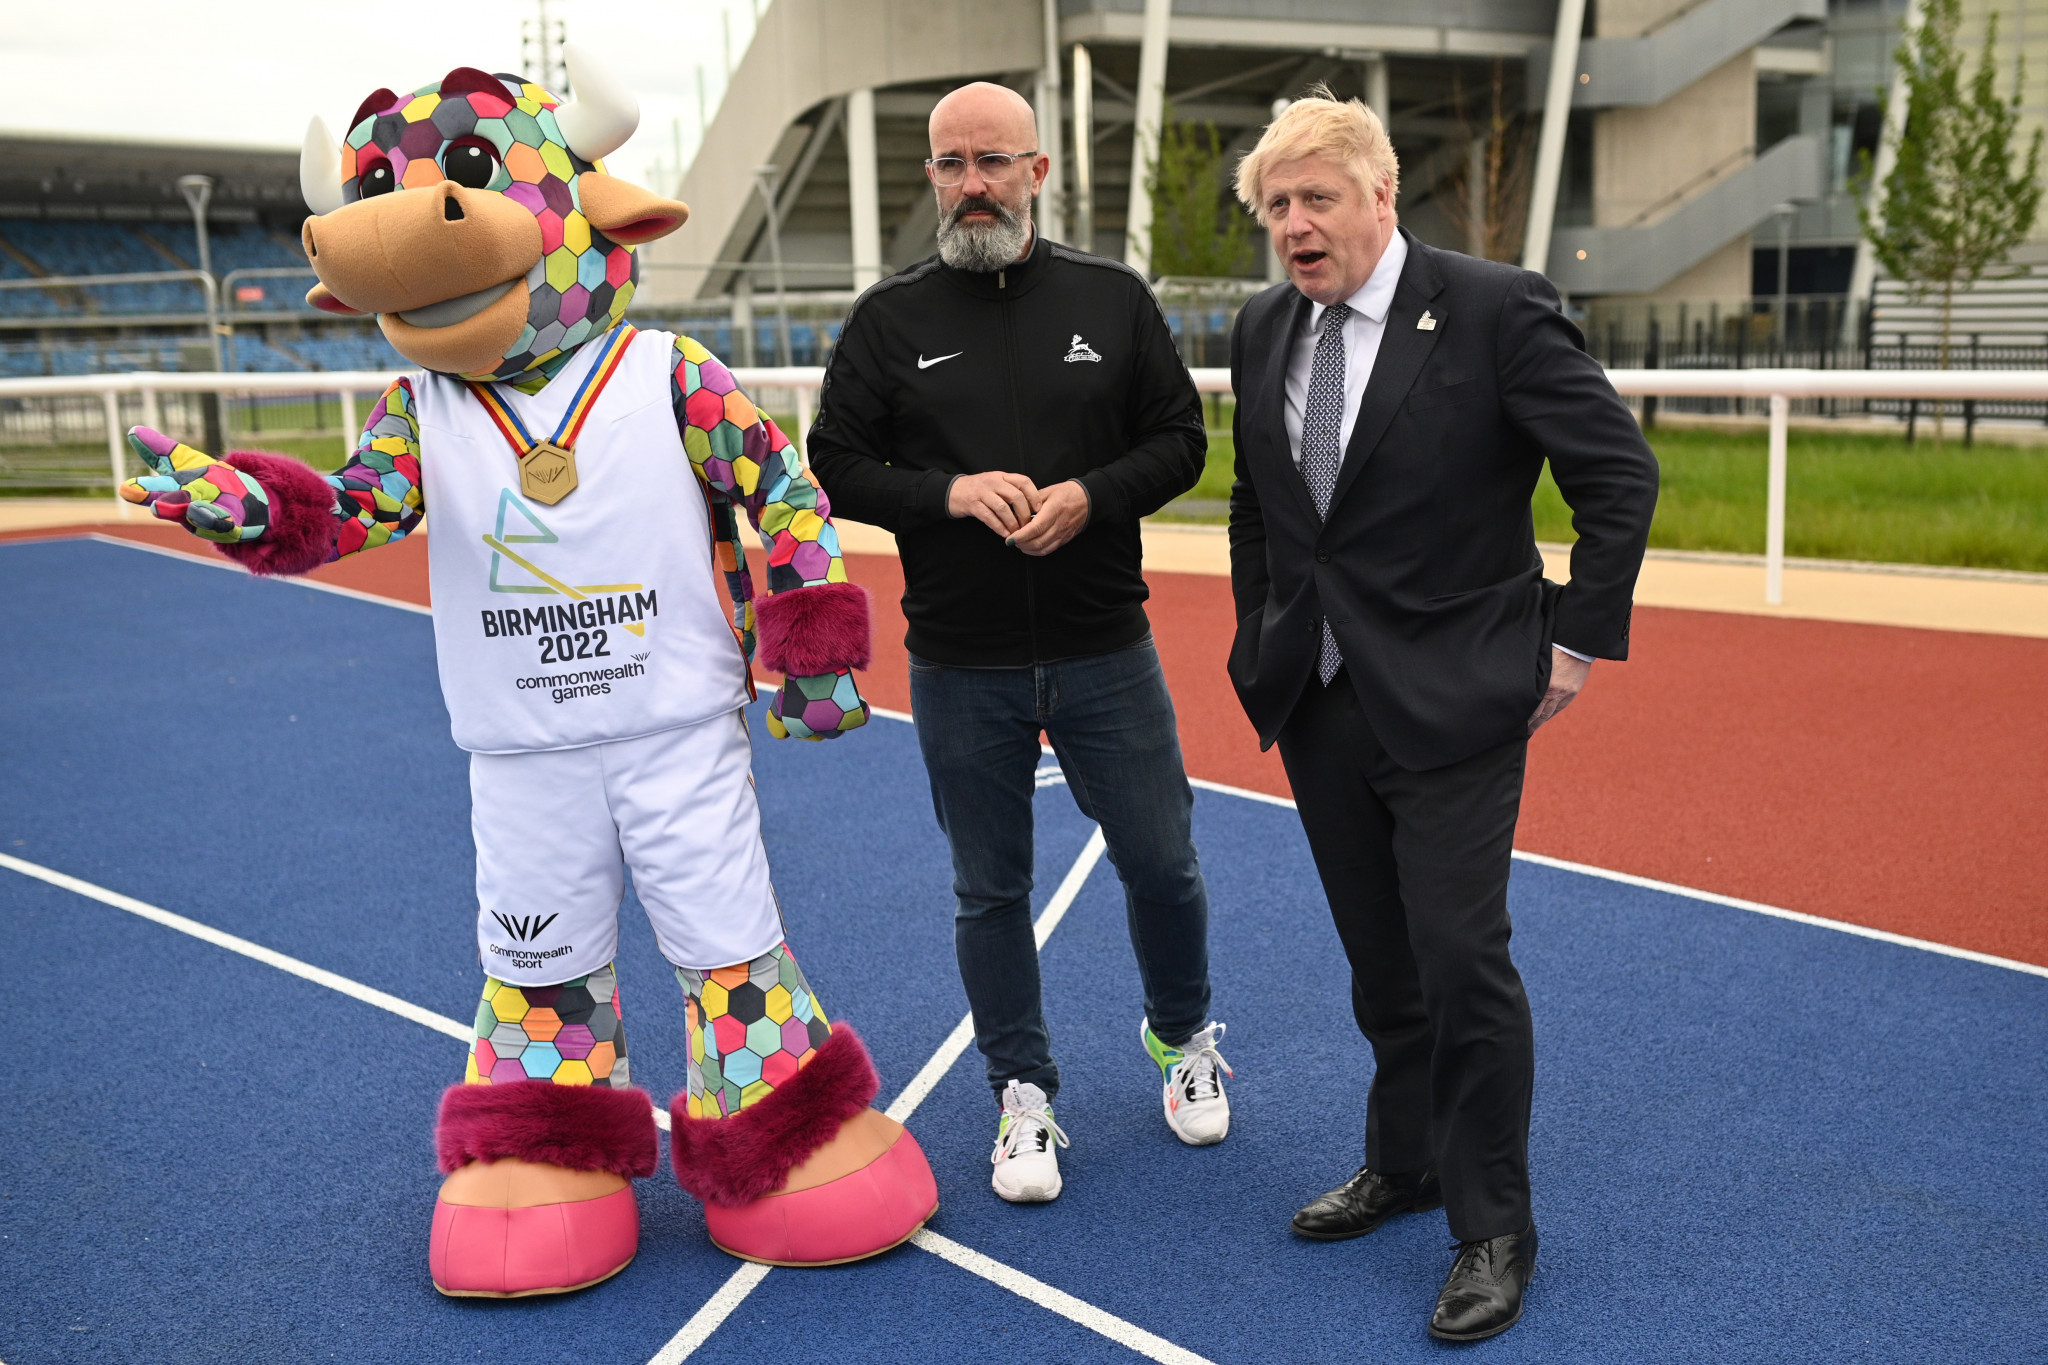 British Prime Minister makes Birmingham visit in build-up to Commonwealth Games